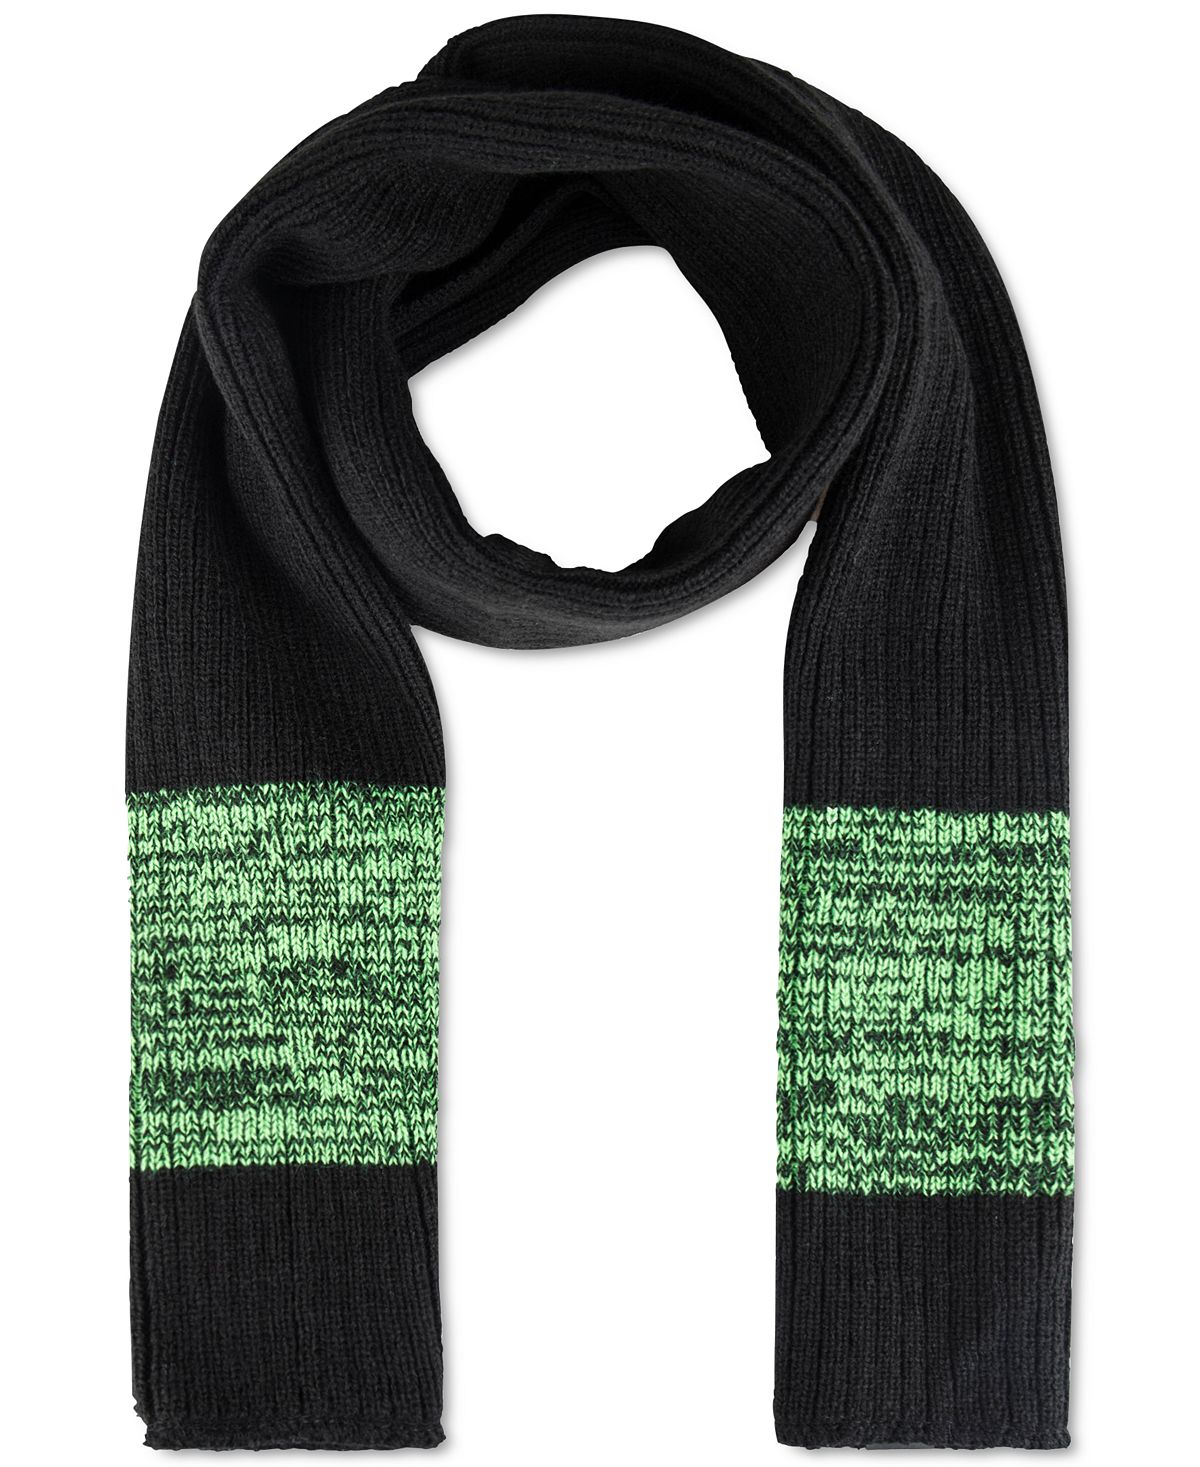 Kenneth Cole Reaction Neon Beanie And Scarf Set Black/Green